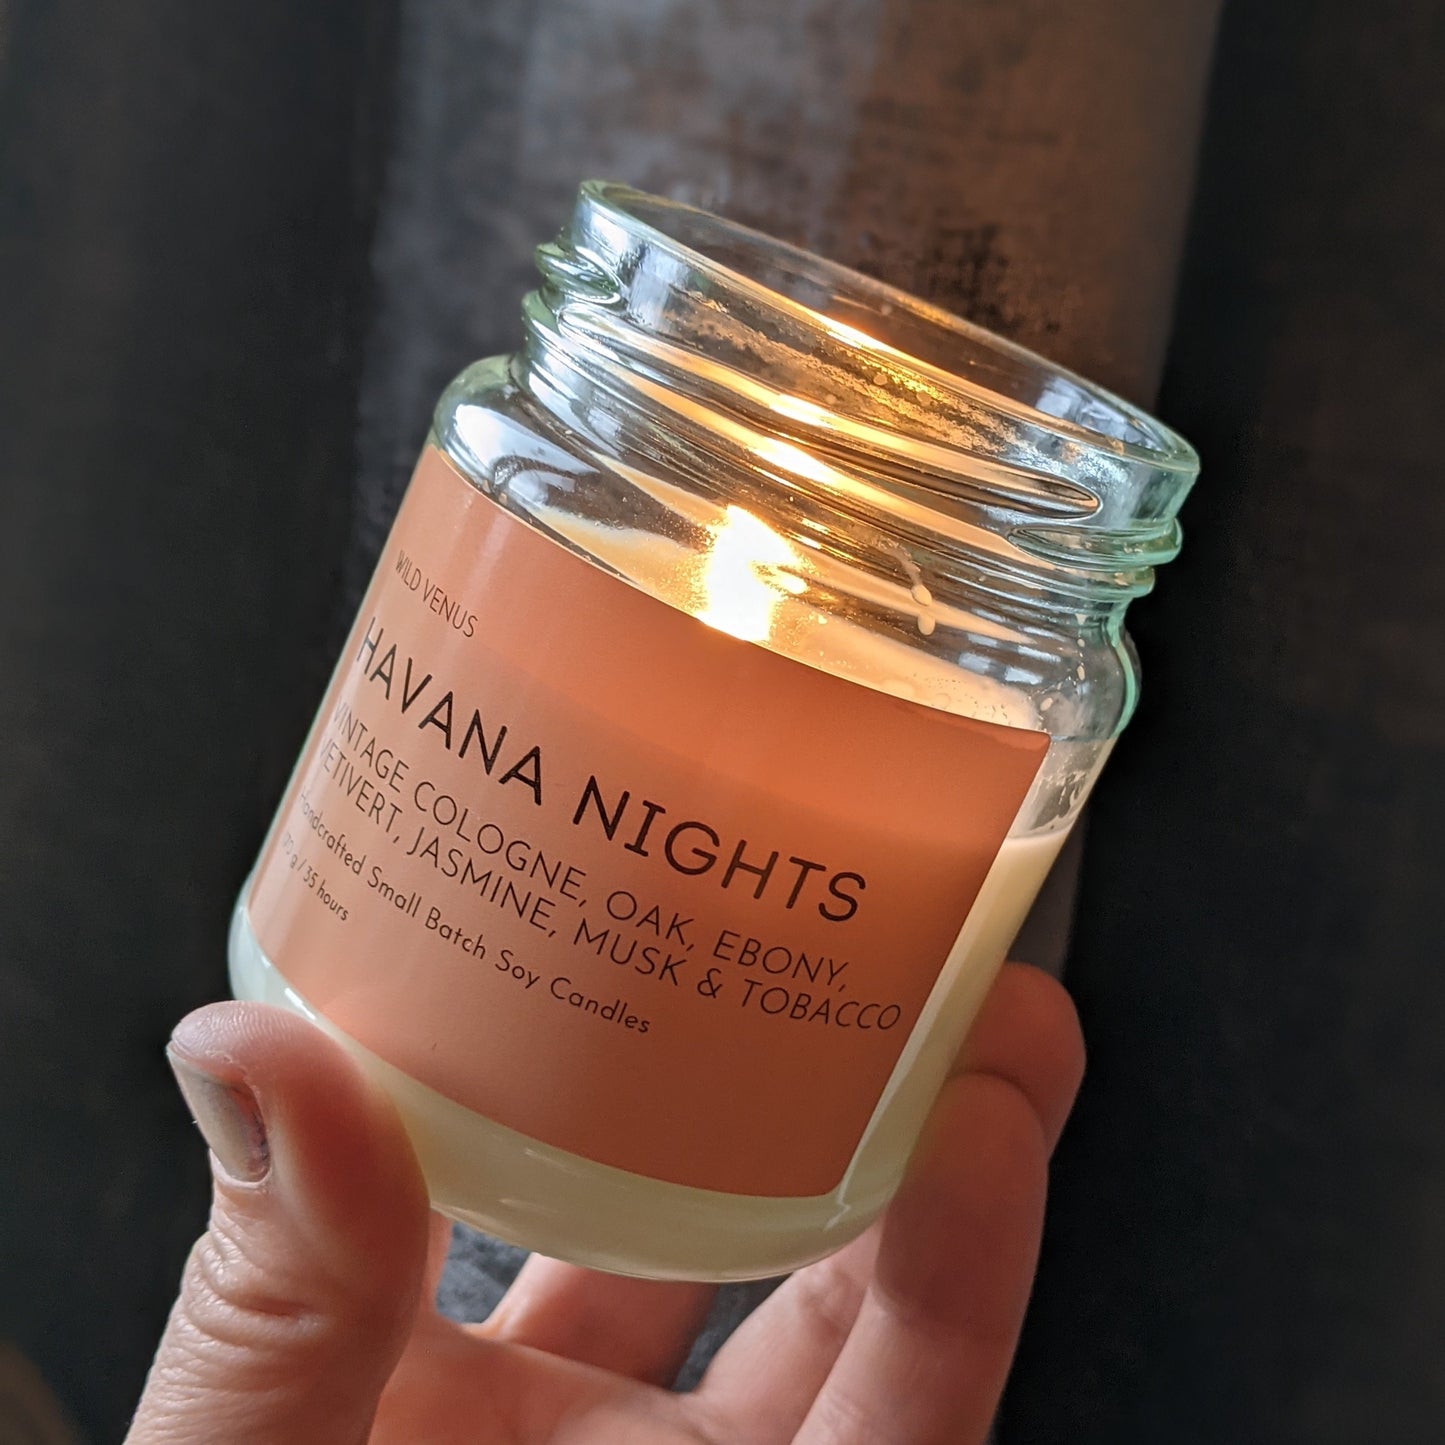 Holding a candle called 'Havana Nights'